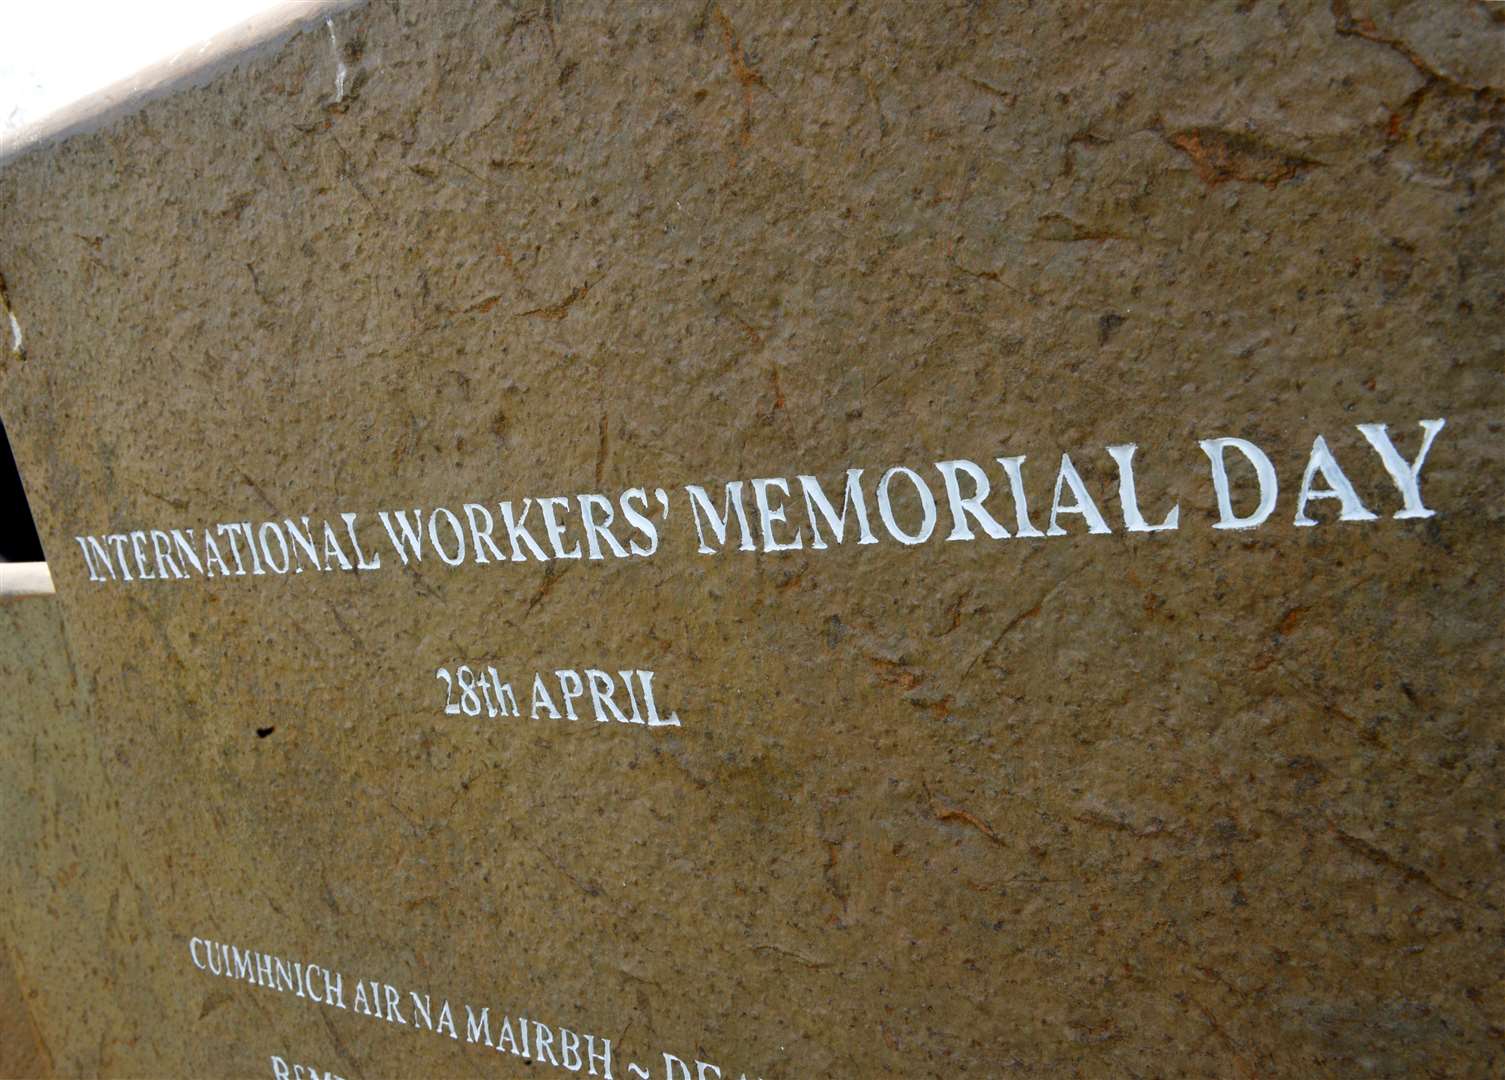 A ceremony will be held in Inverness to mark International Workers' Memorial Day.